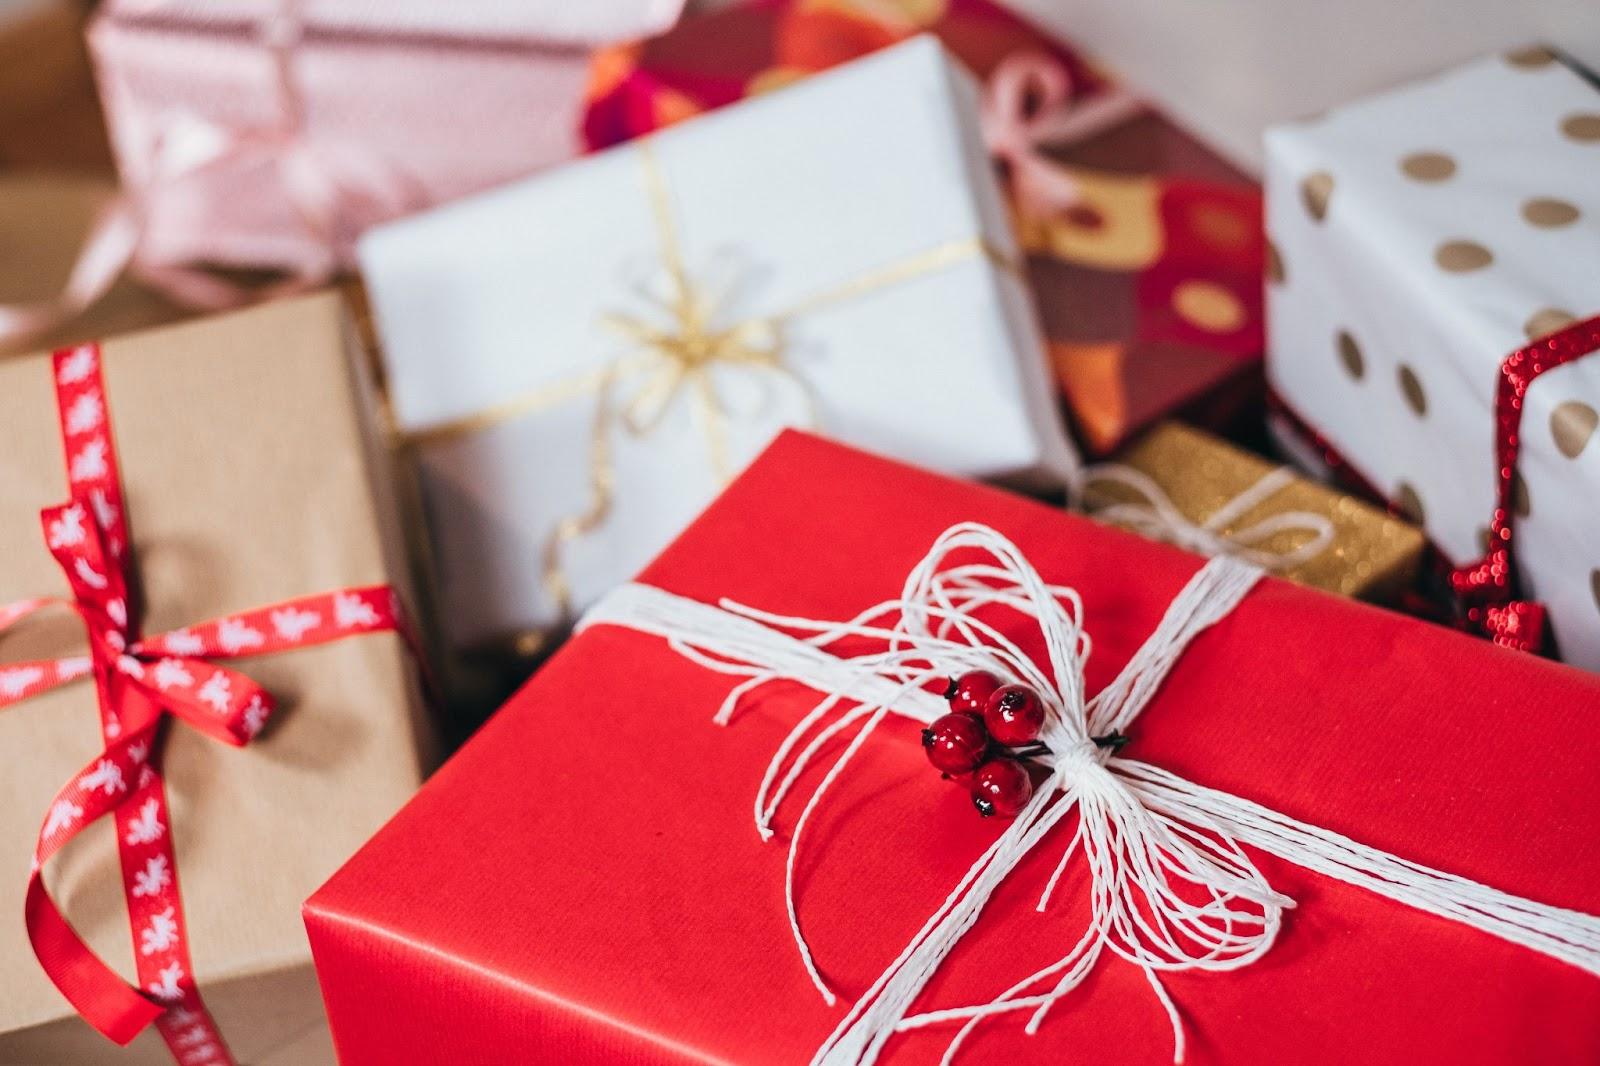 8 Gift Ideas to Get for Your Family